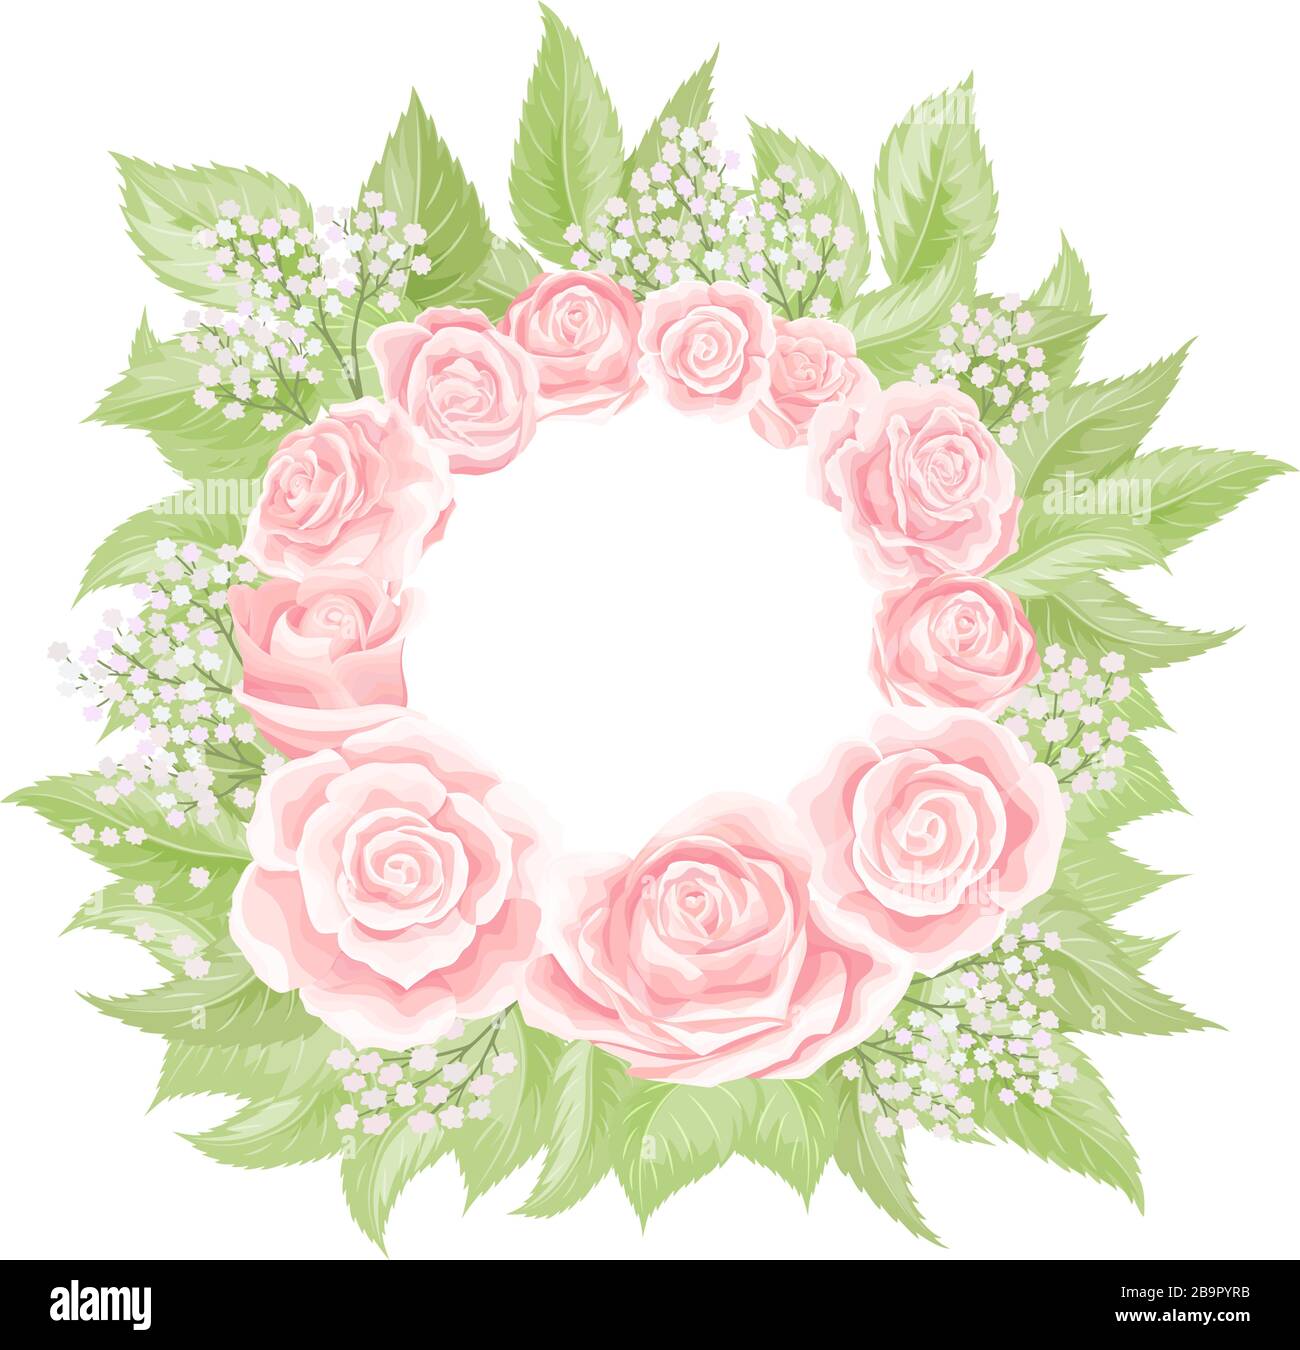 Rose frame vector drawing